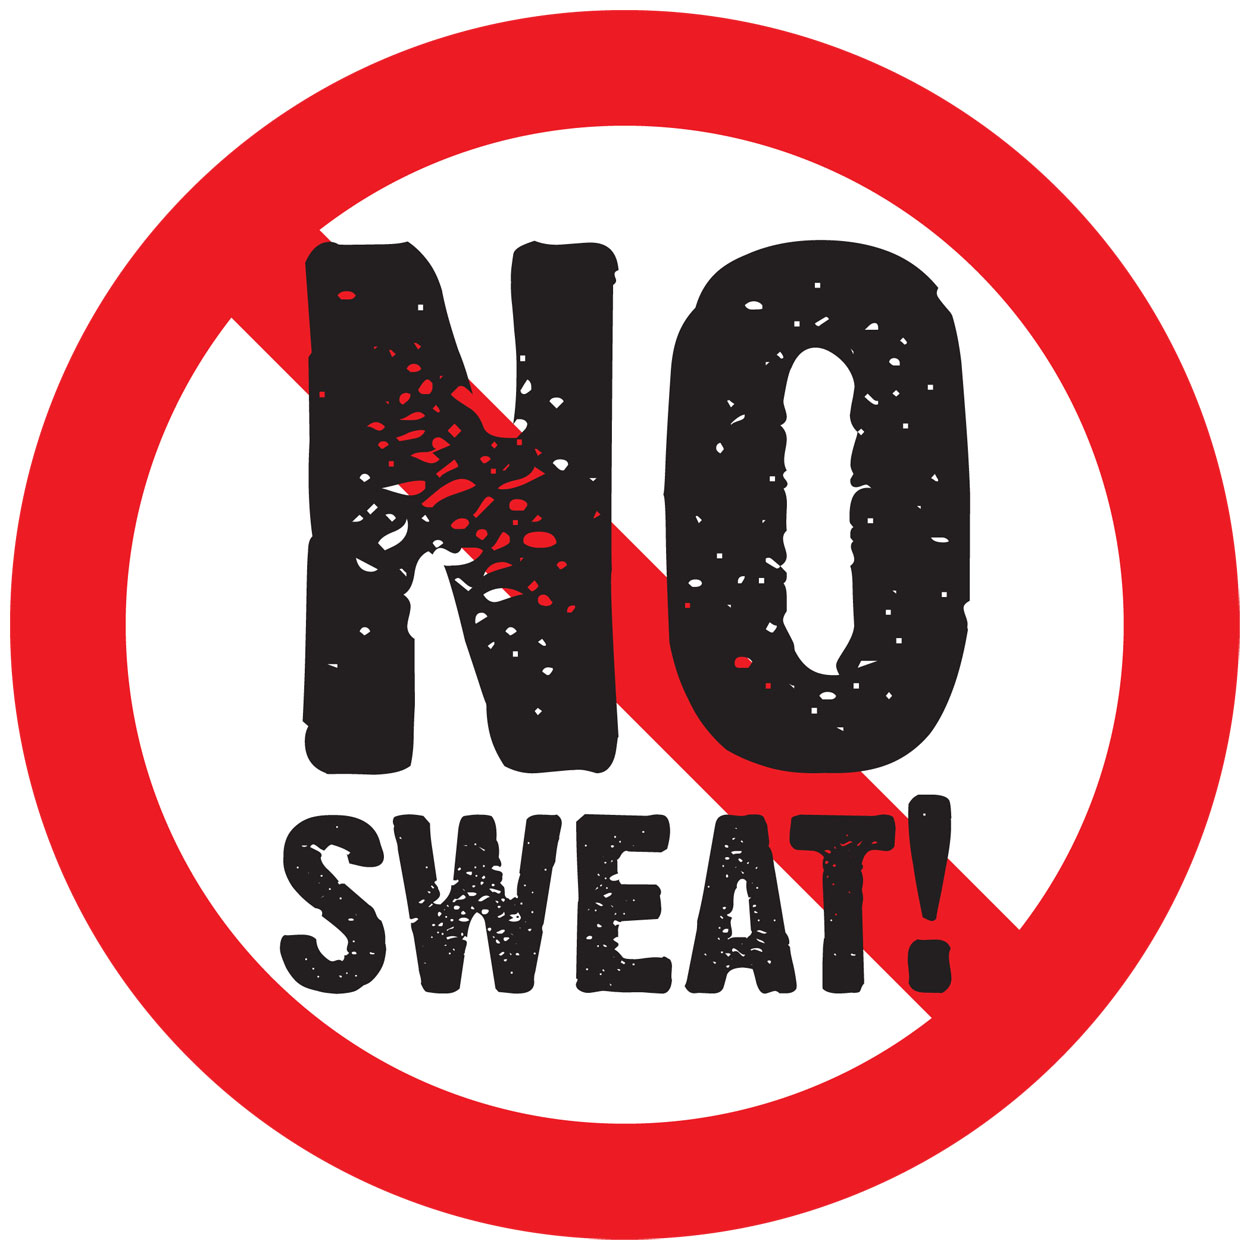 Top 4 Treatments For Excessive Sweating